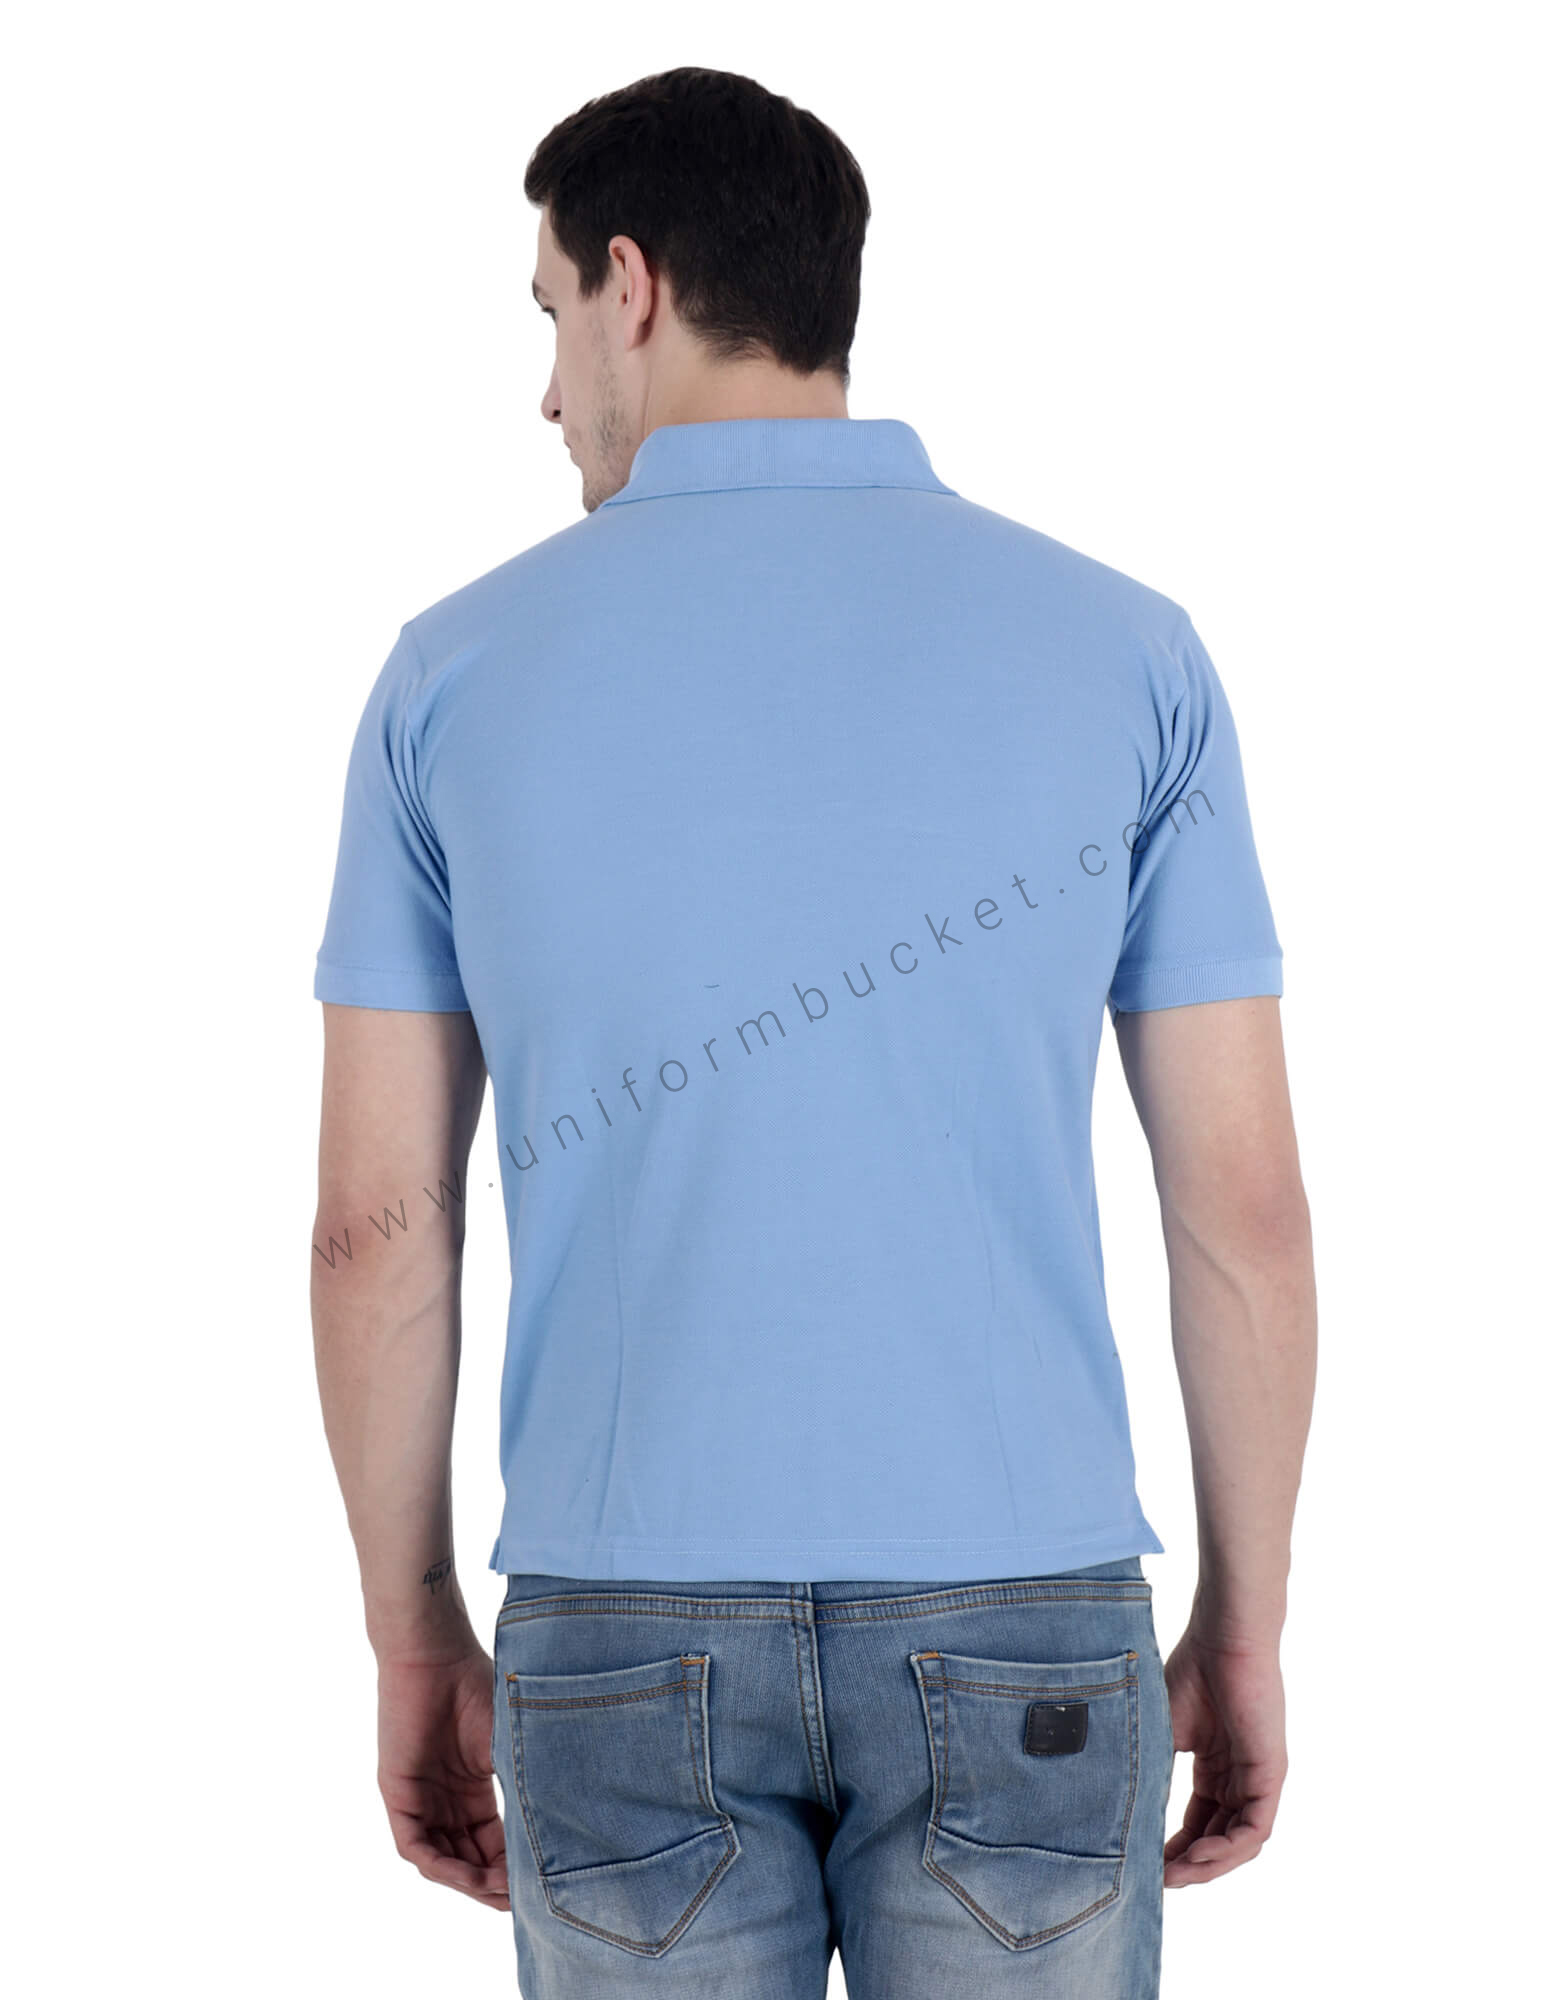 Buy Sky Blue Uniform Polo T-Shirt For Men Online @ Best Prices in India ...